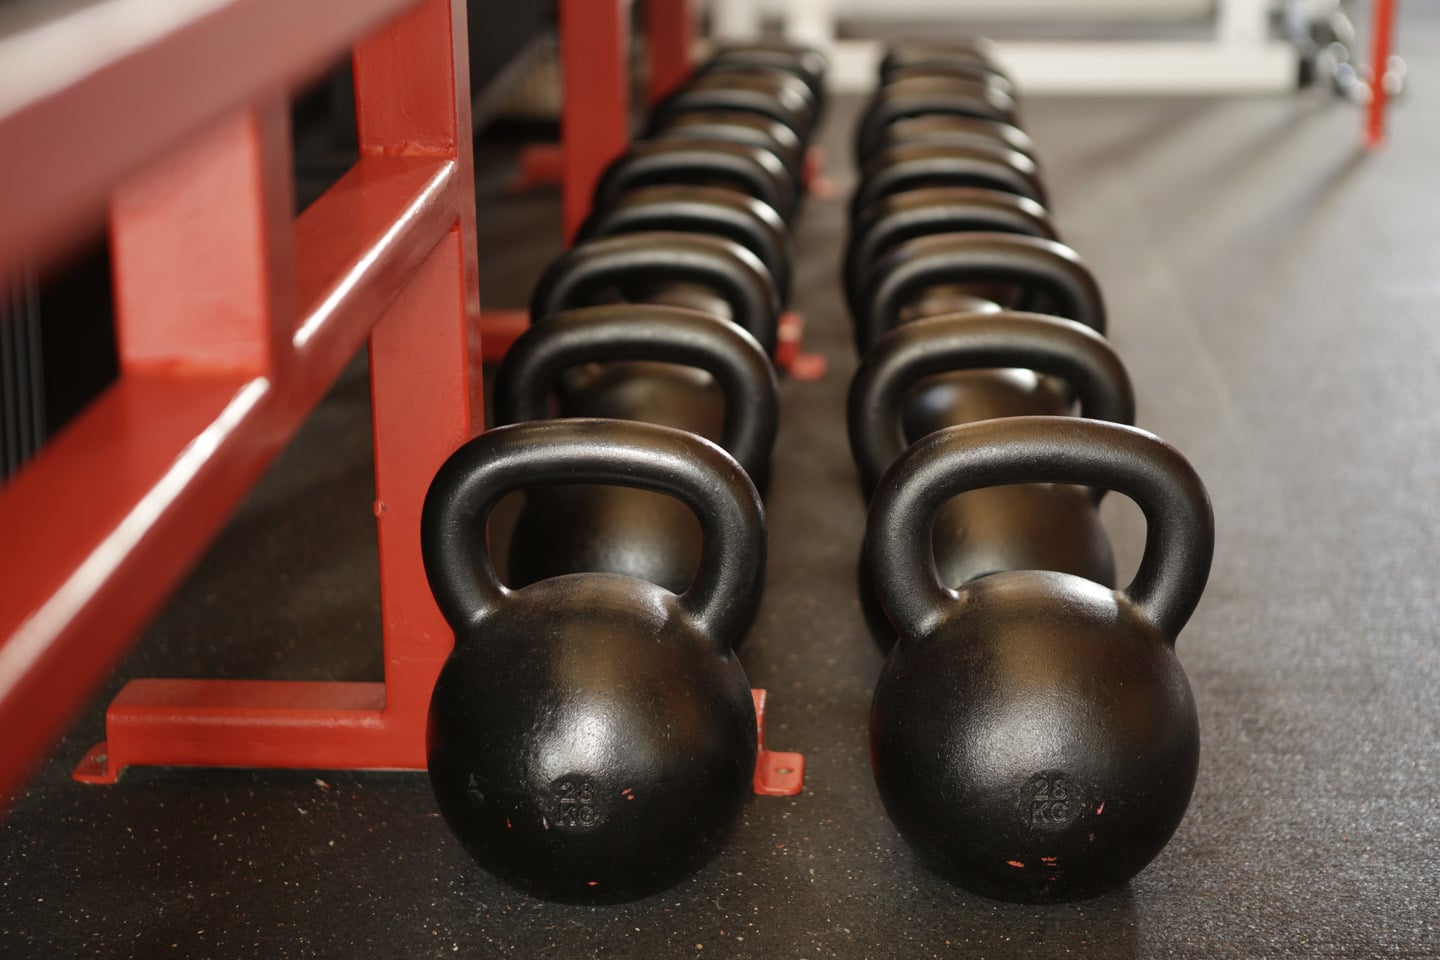 Kettle bell free weights inside a school gym